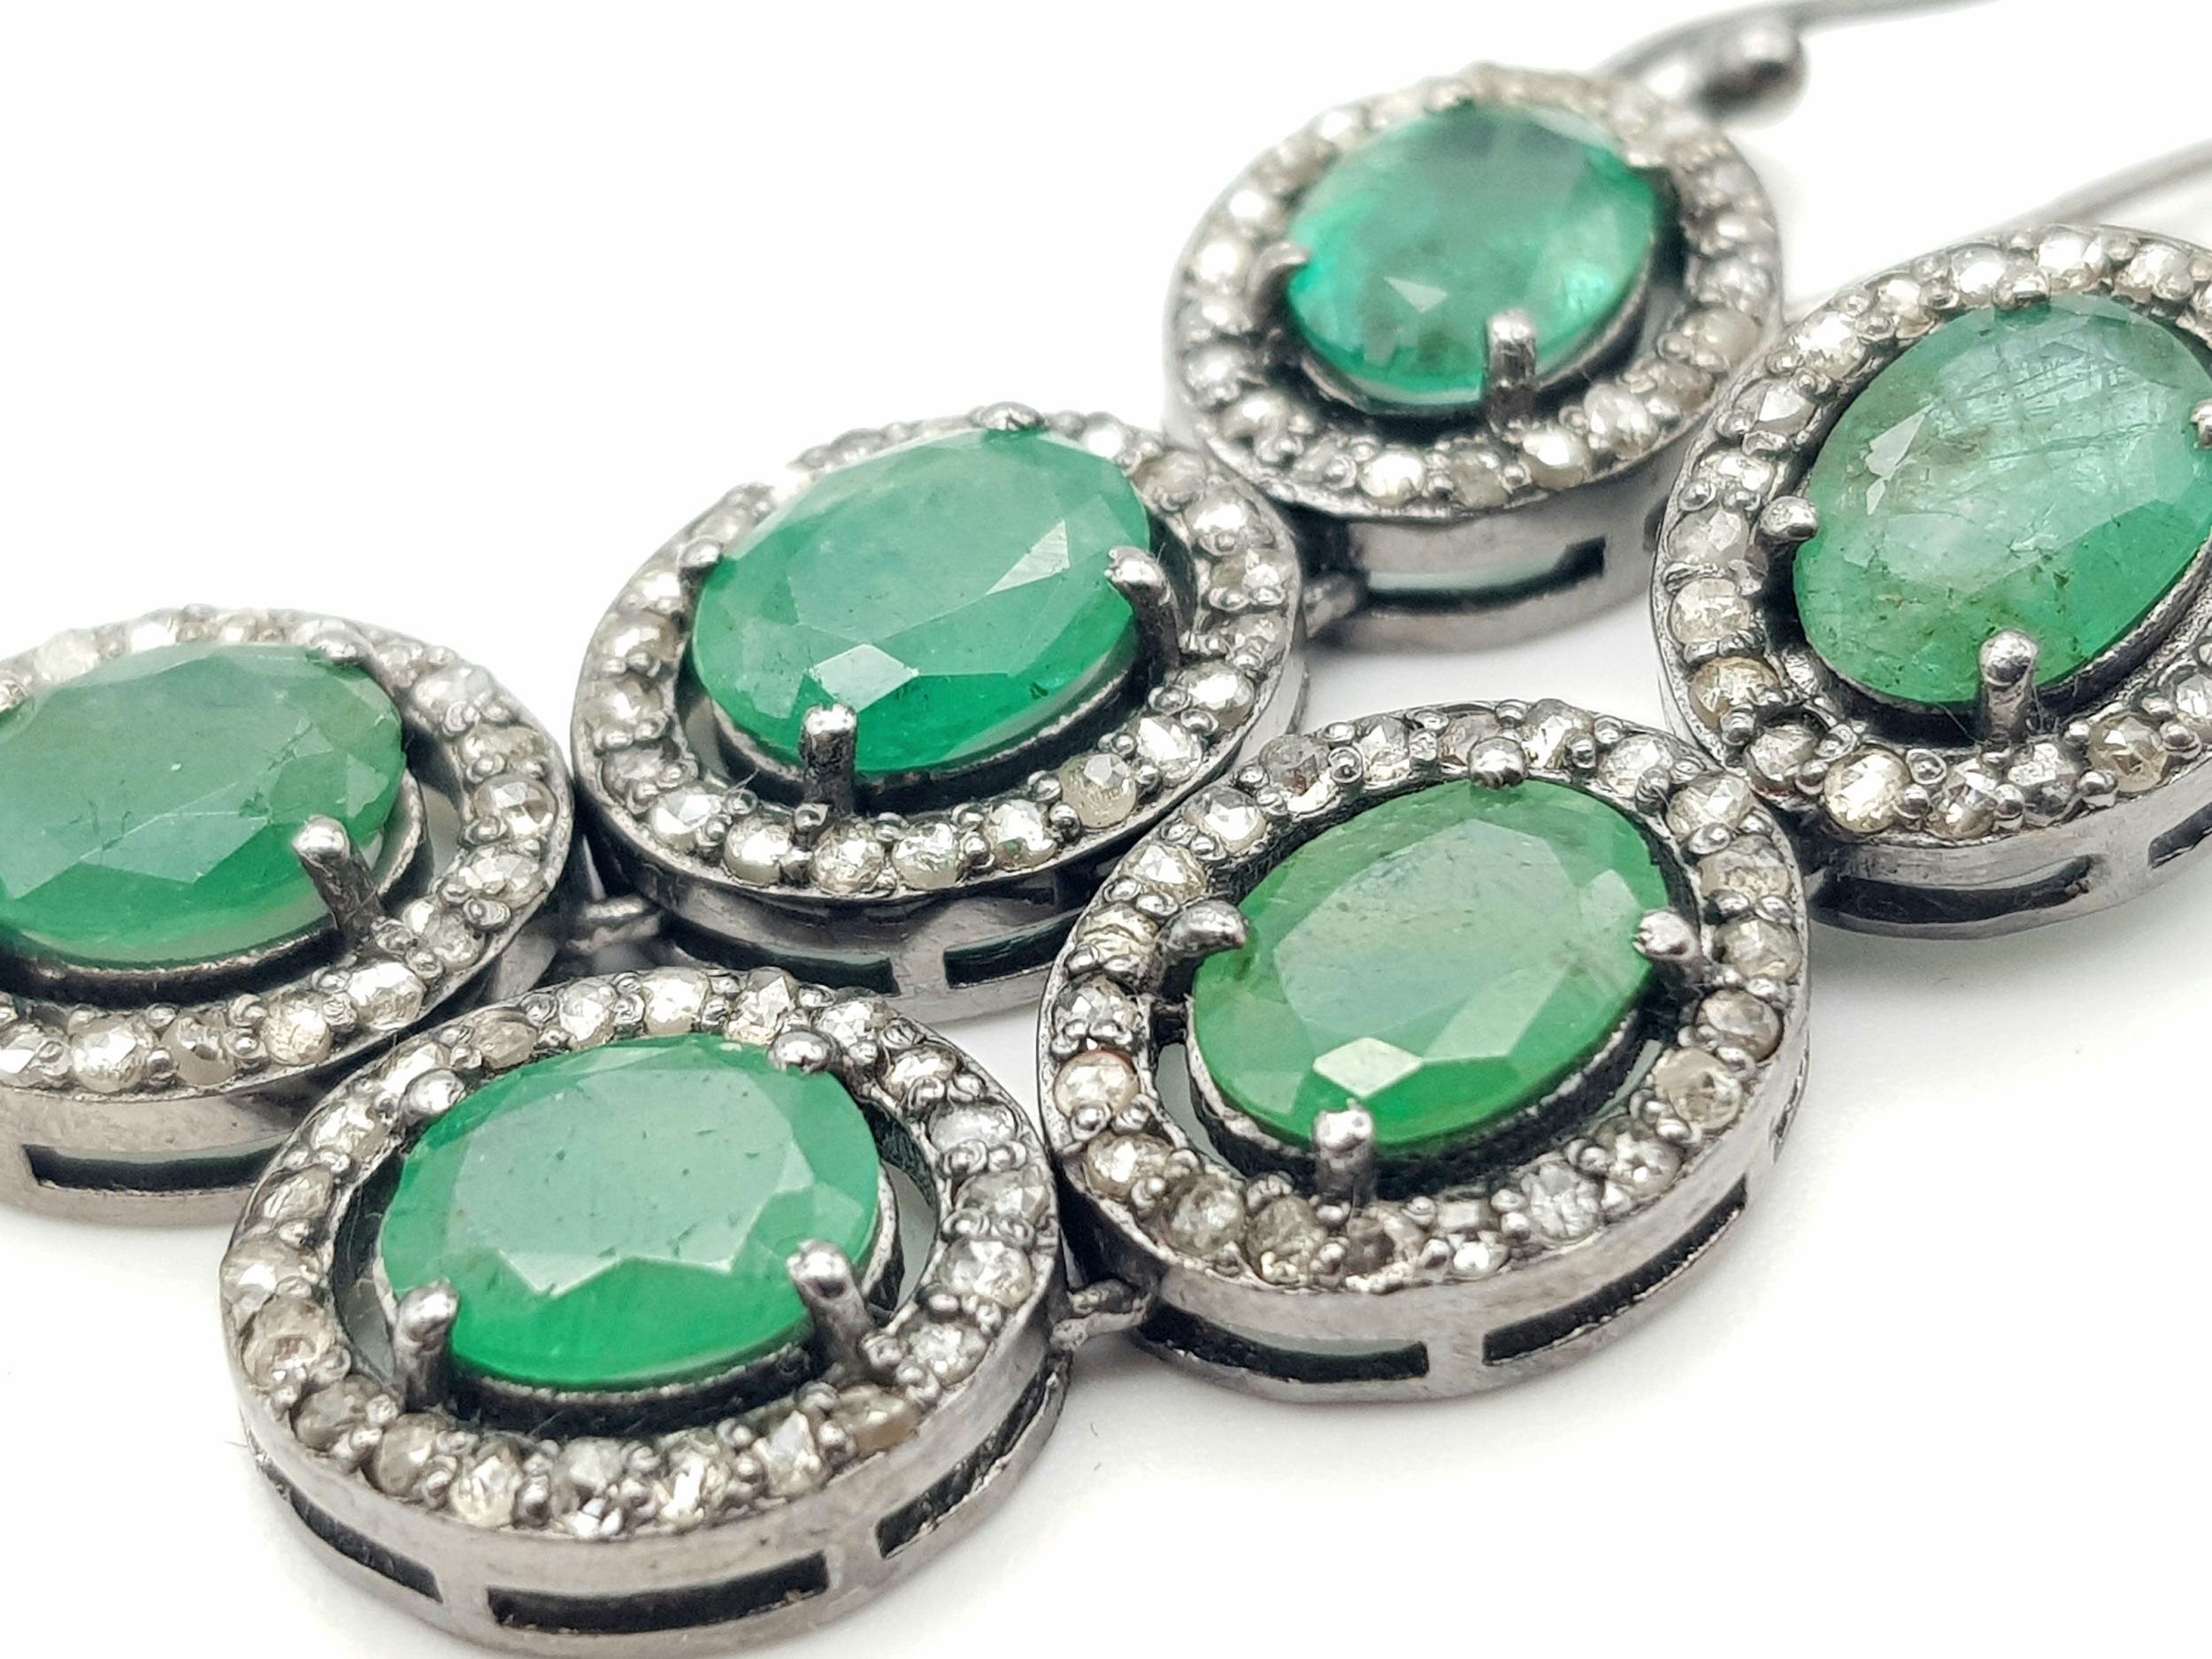 A Pair of Emerald Gemstone Drop Earrings with Halos of Diamonds. Set in 925 Silver. Emeralds - - Image 2 of 4